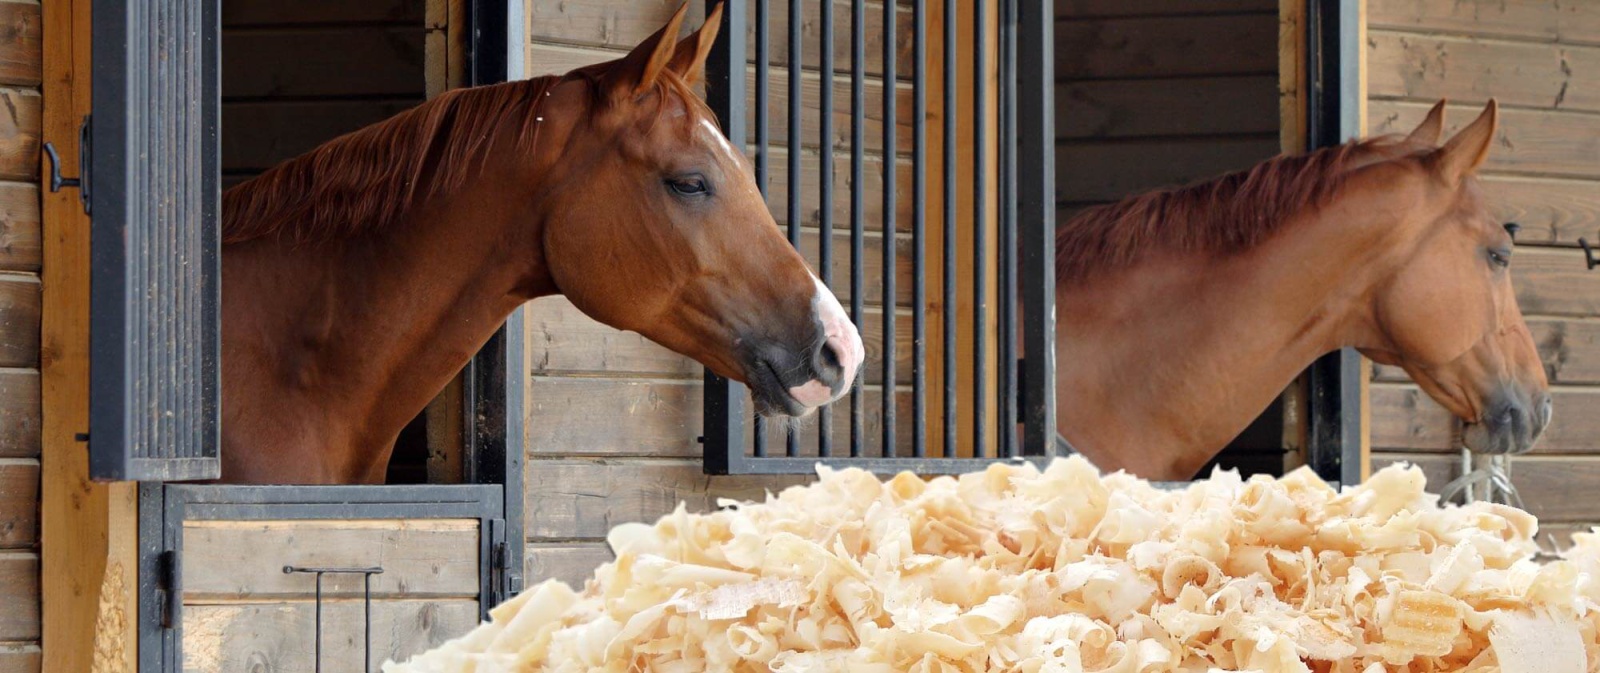 Horses inside a horse stable bedded with premium wood shavings